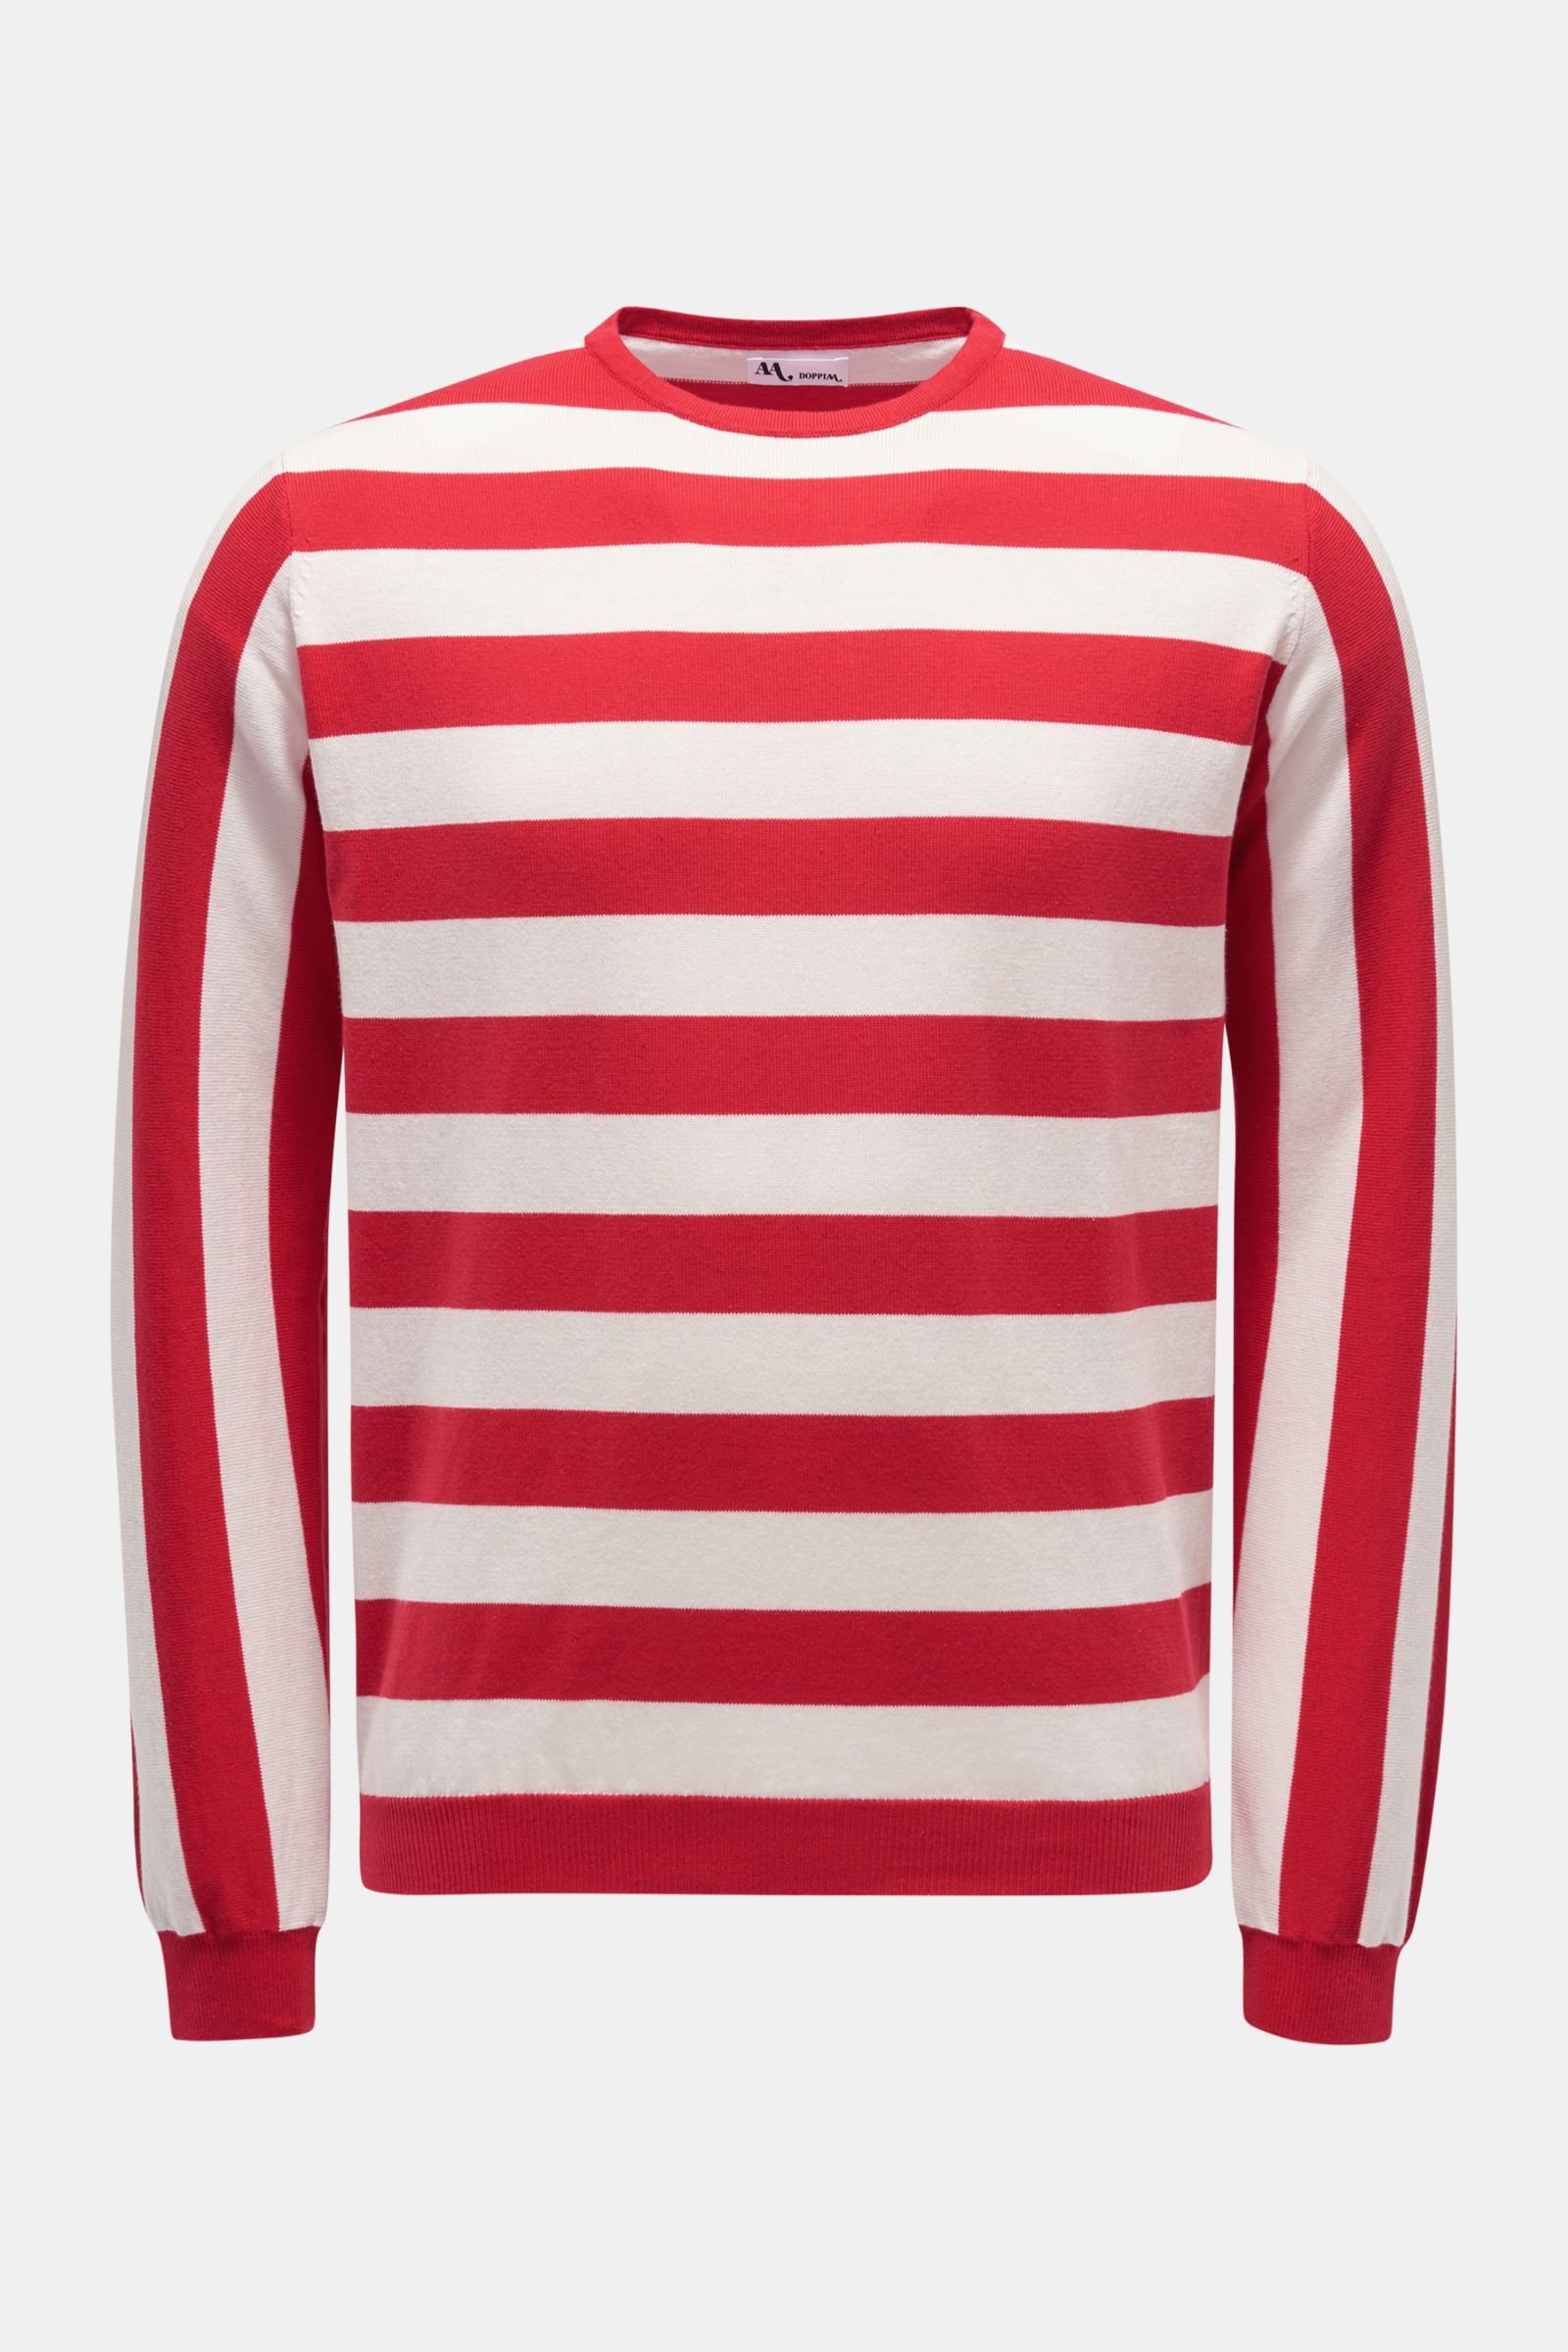 Crew neck jumper 'Aandronico' red/white striped